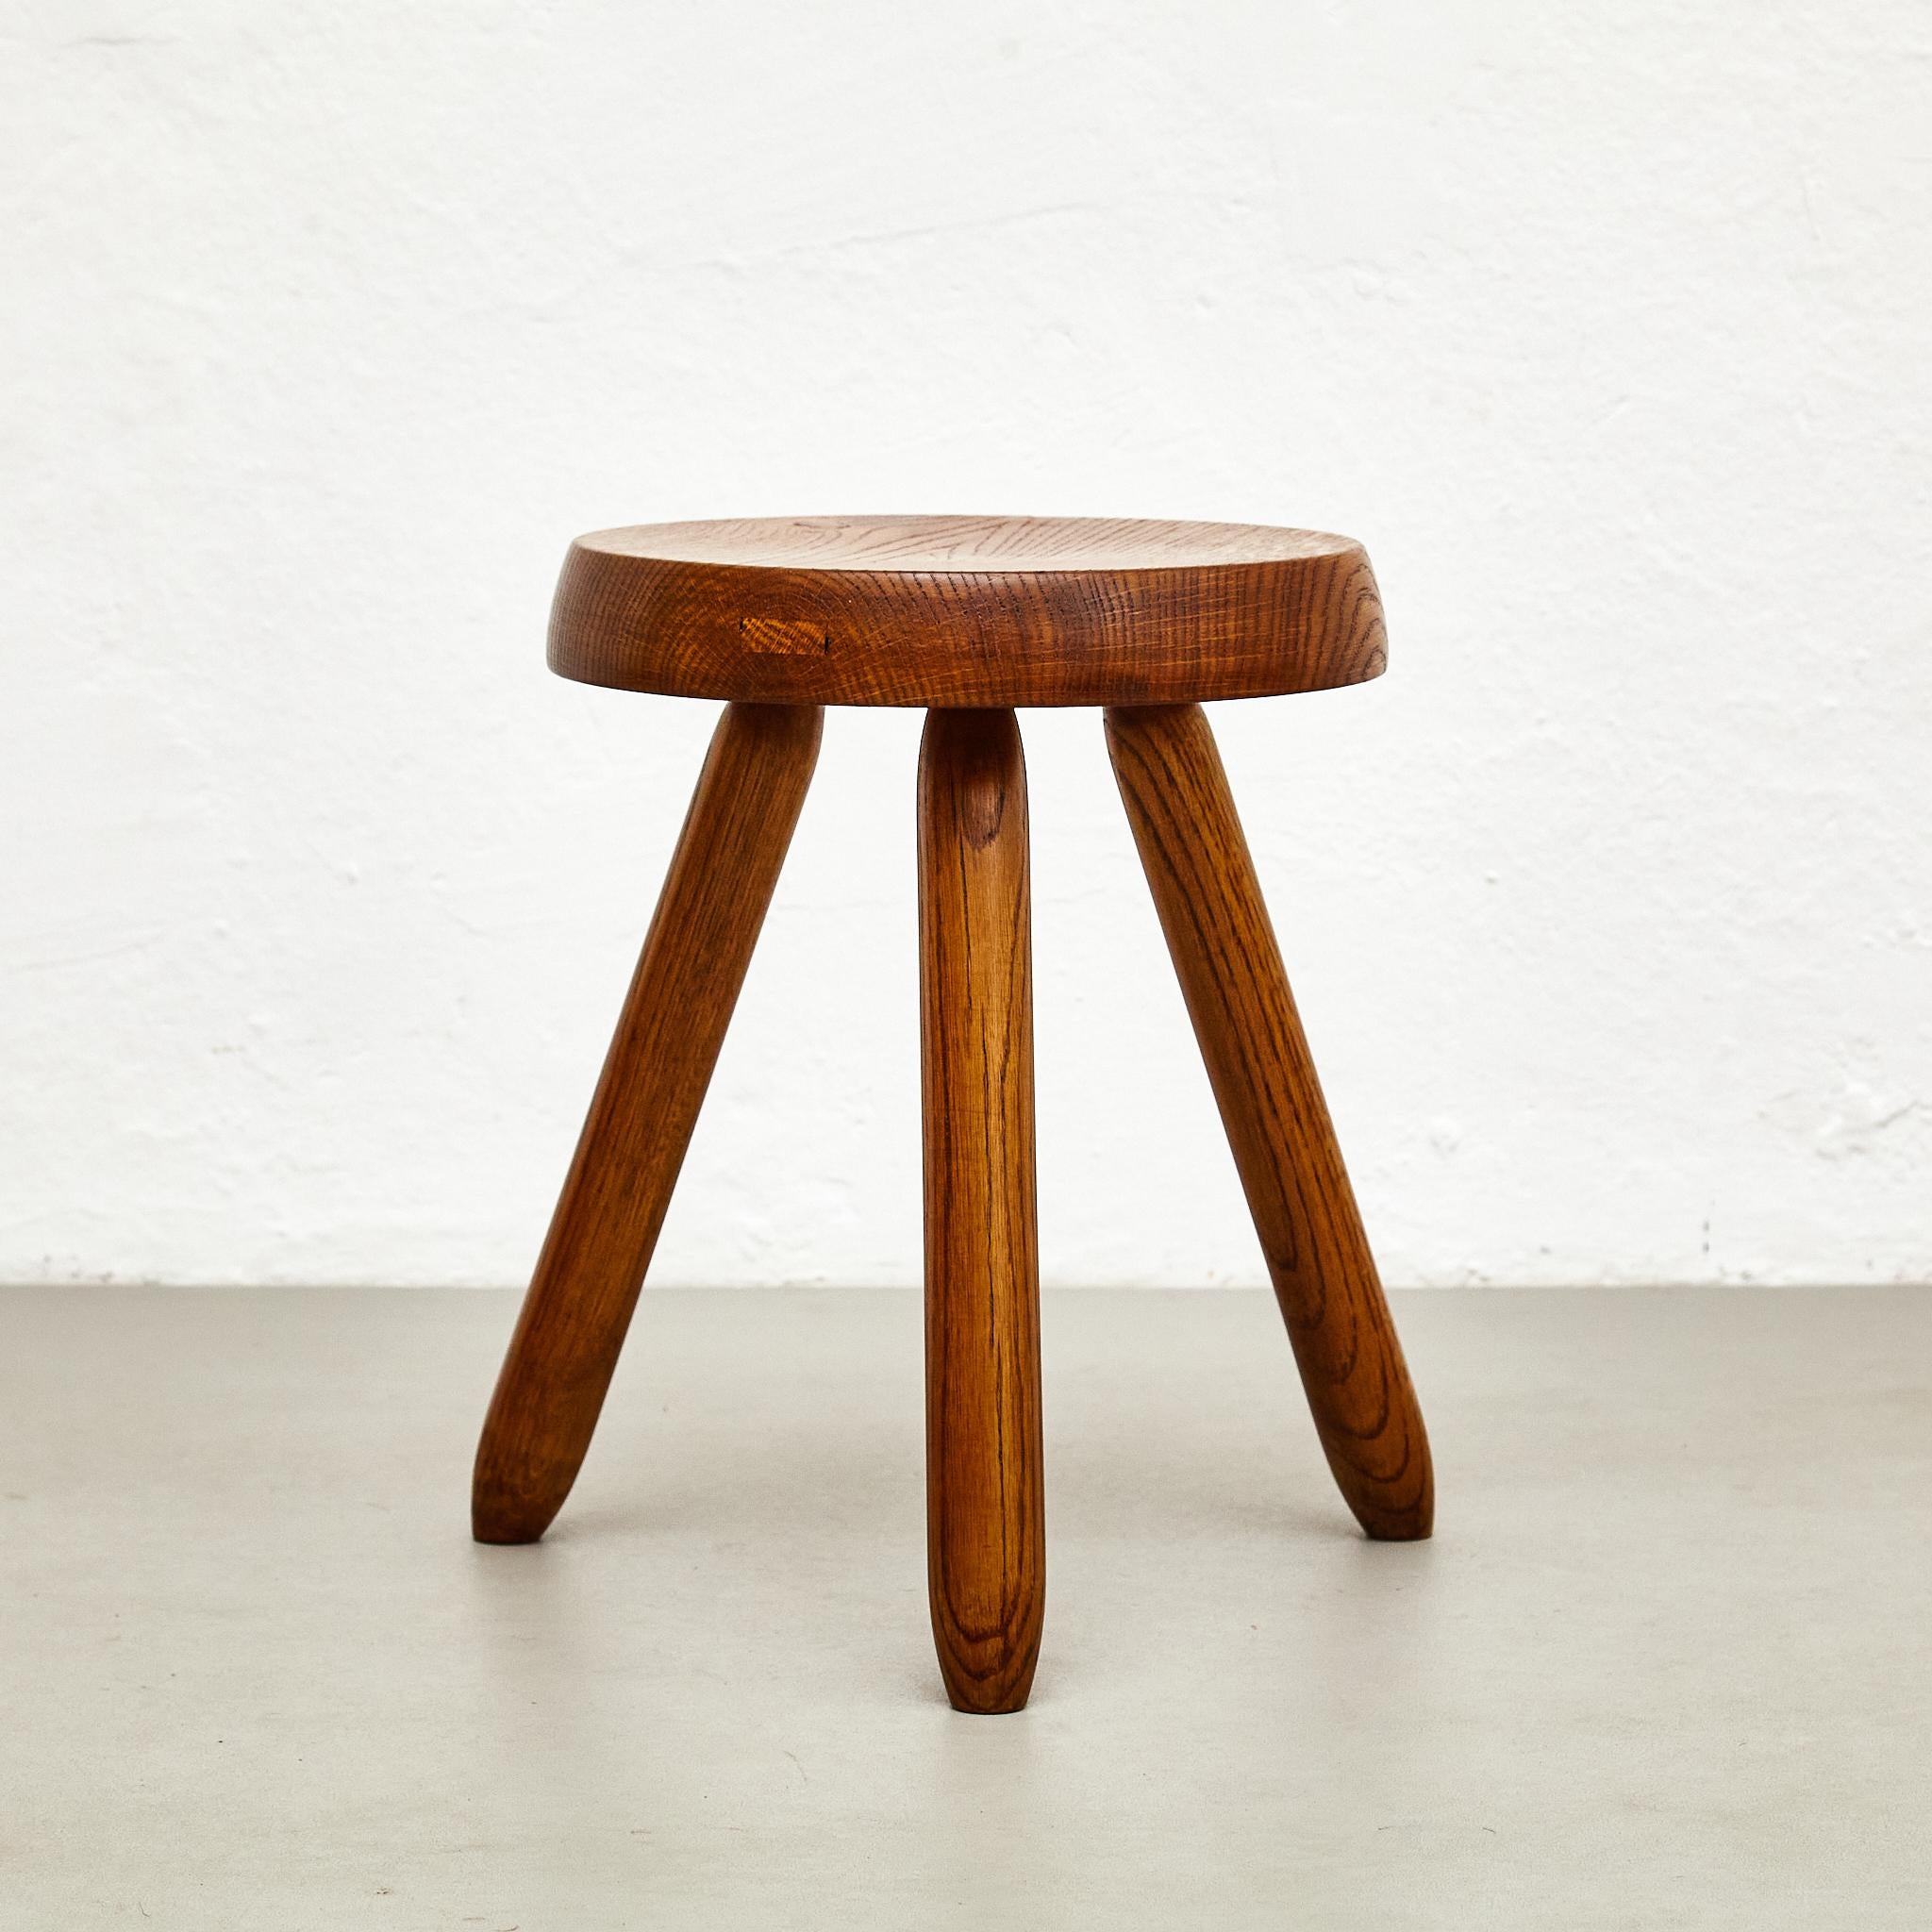 Mid-20th Century Mid-Century Modern Wood Tripod Stool in the Style of Charlotte Perriand For Sale